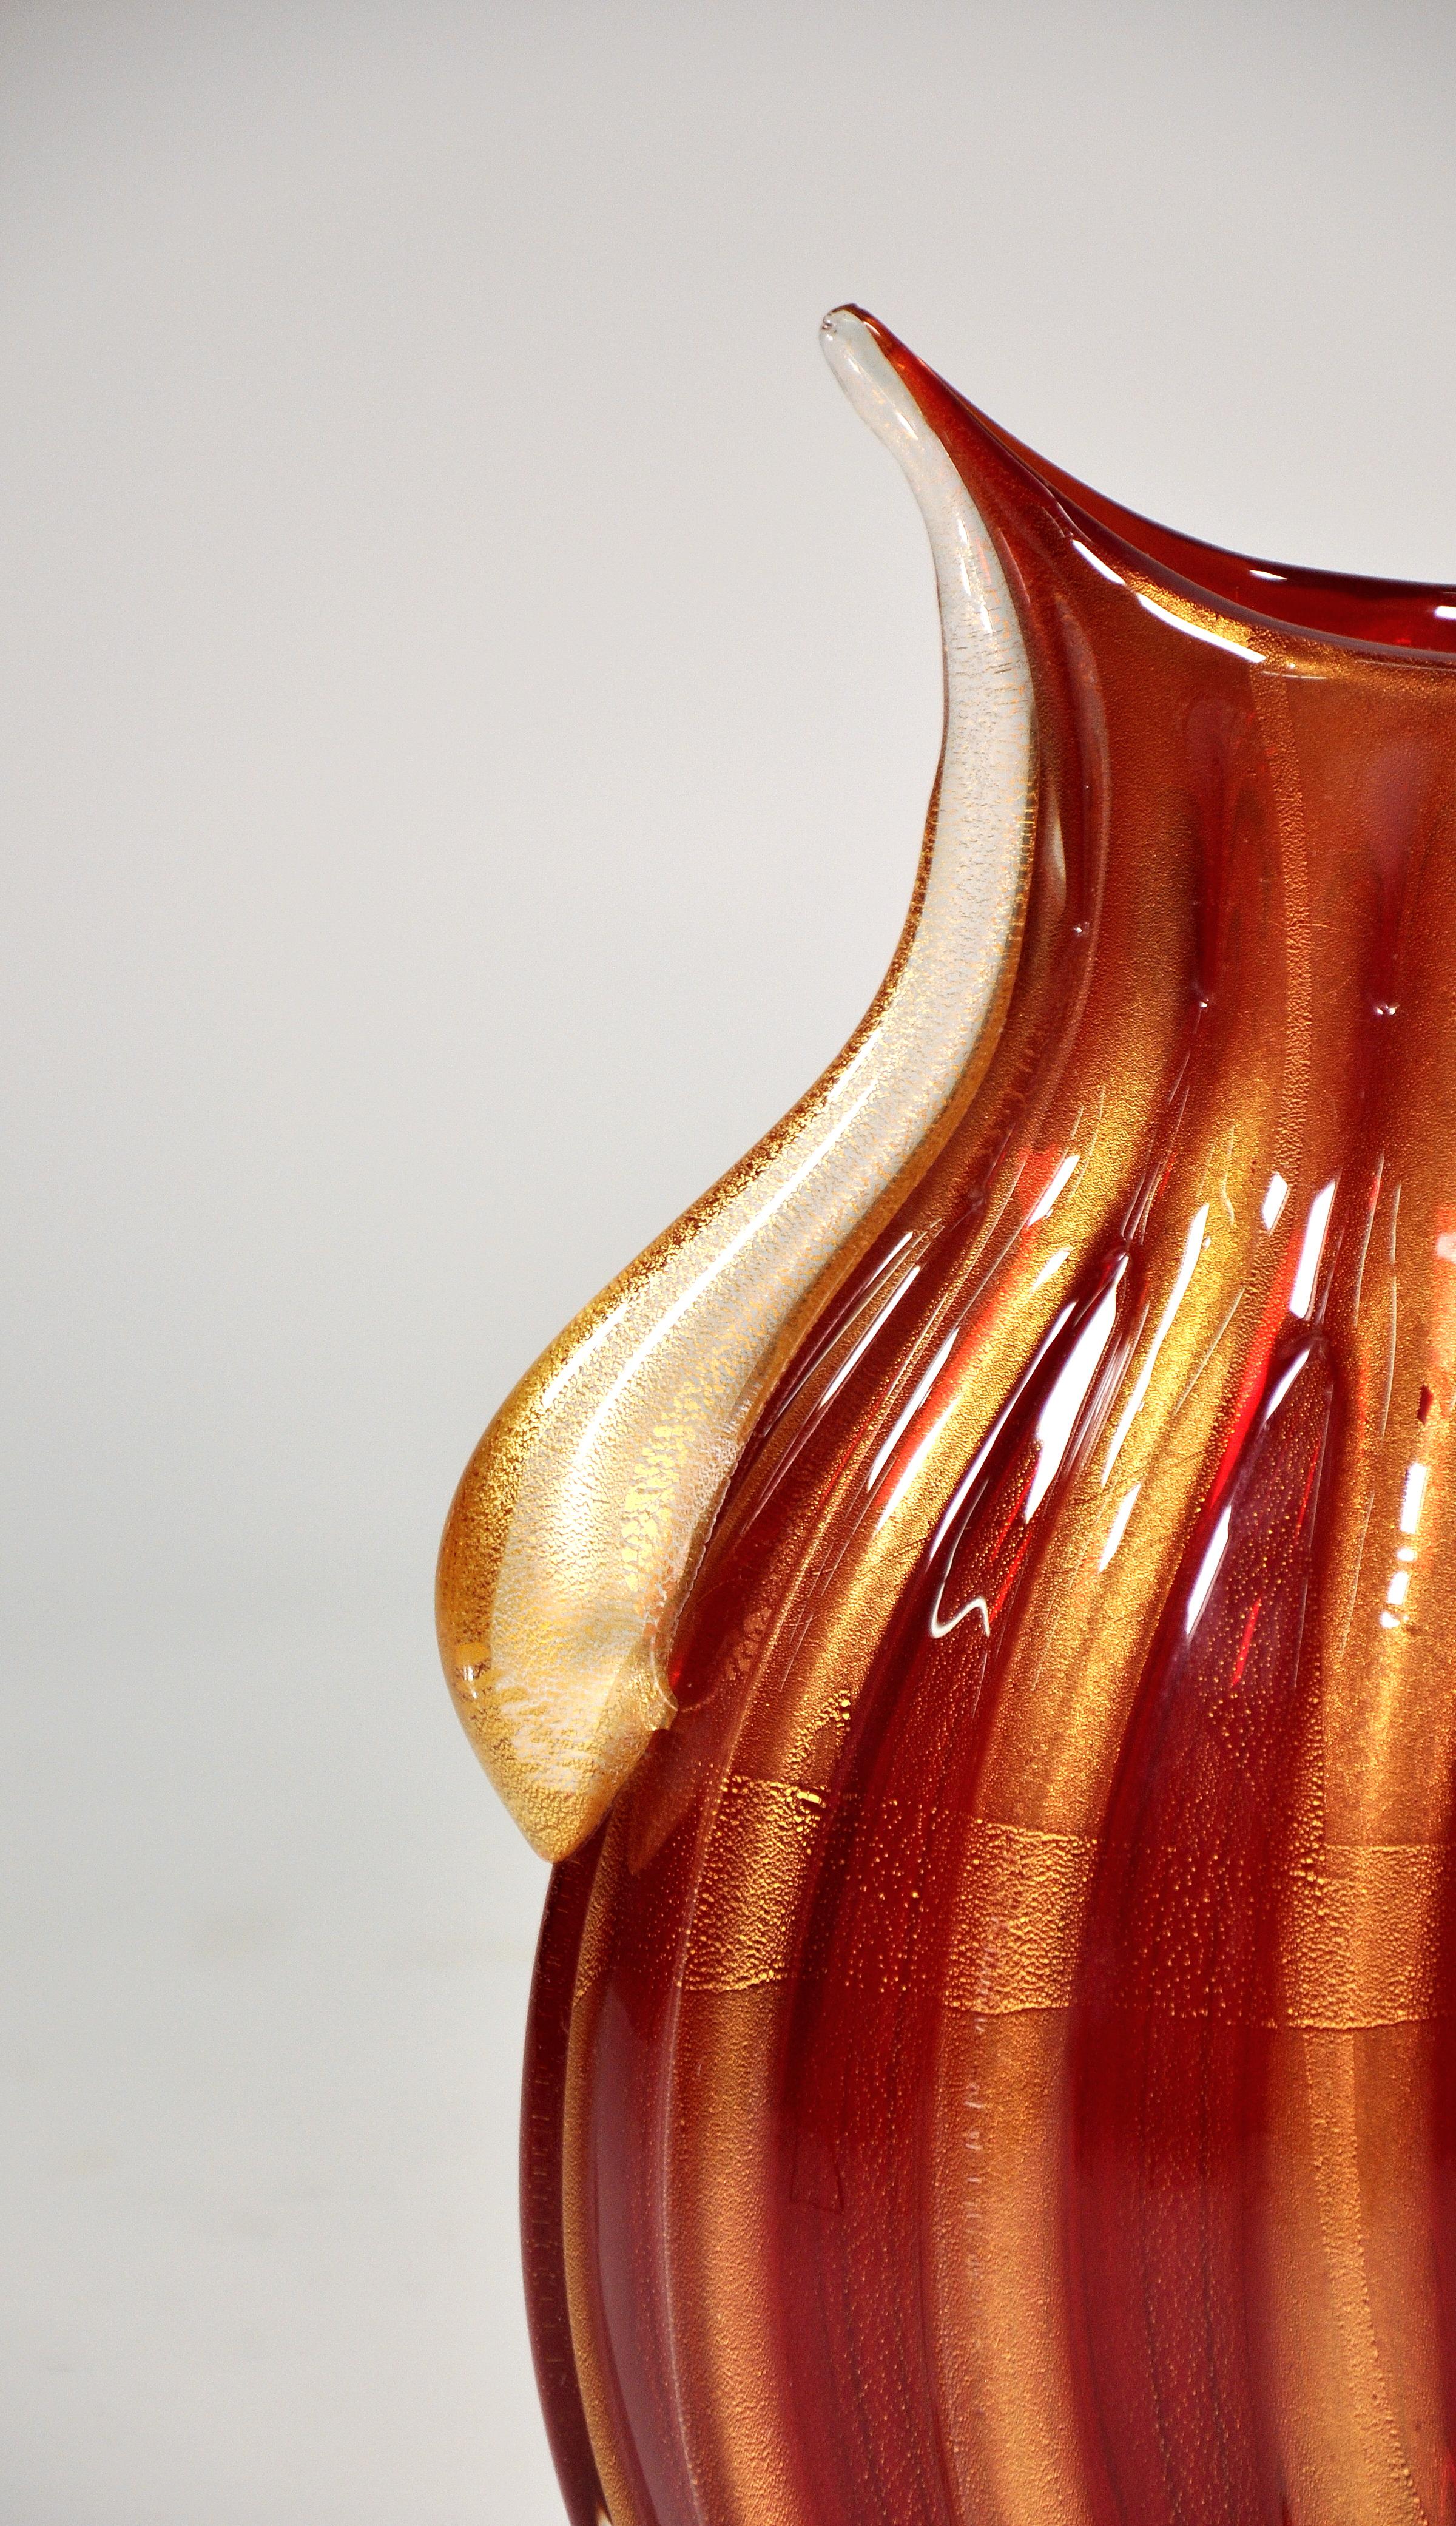 Signed Pair of Red and Gold Murano Glass Vases by Pino Signoretto For Sale 1